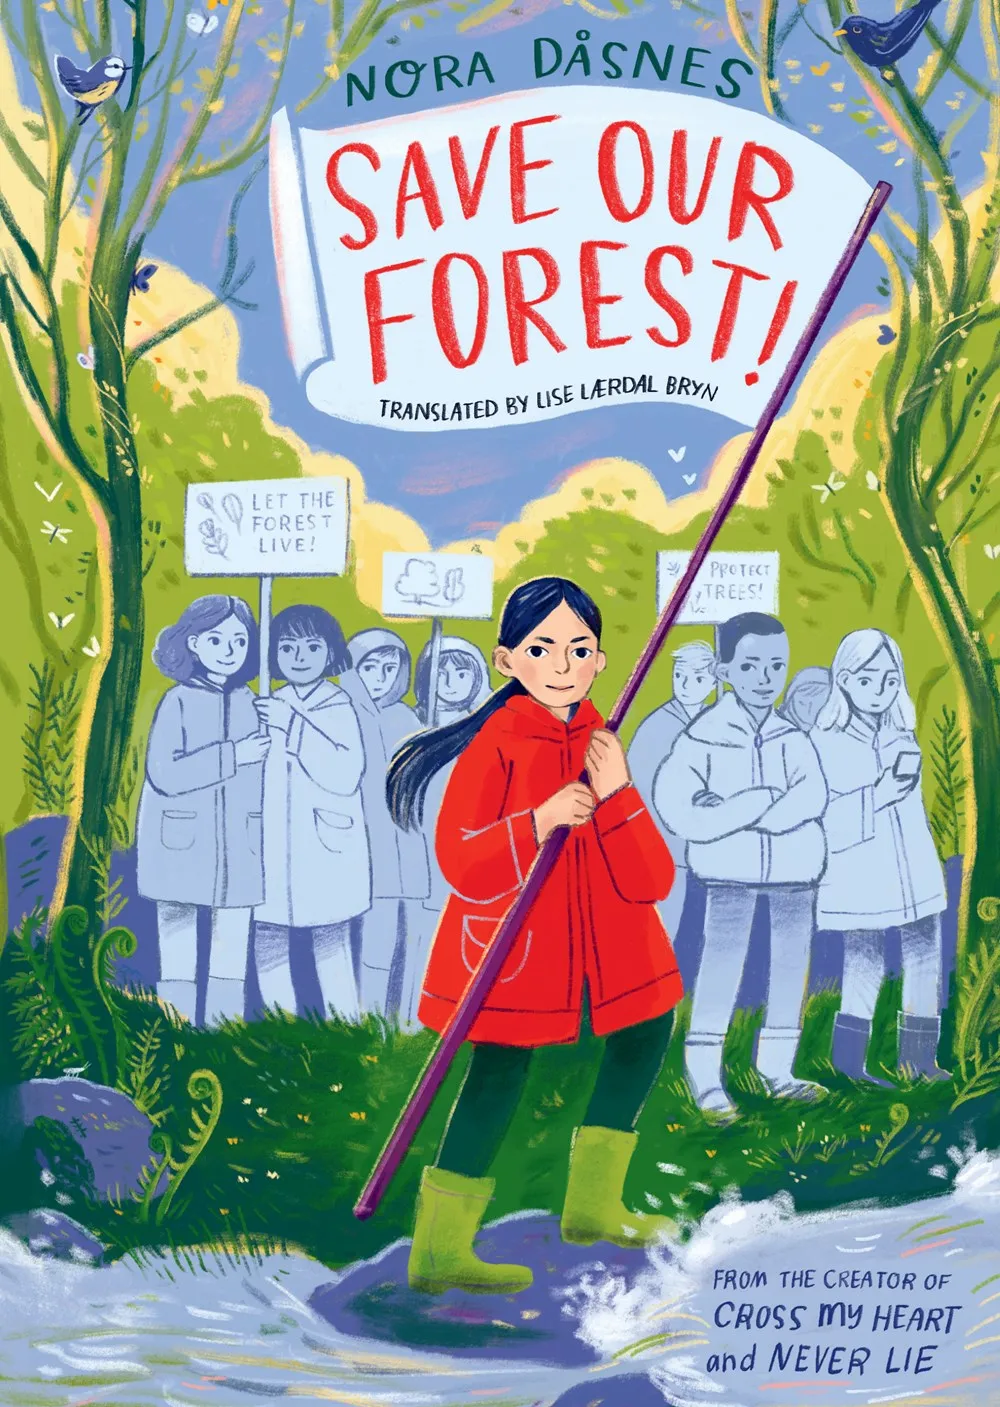 Cover of Save Our Forest! by Nora Dåsnes, translated by Lise Laerdal Bryn